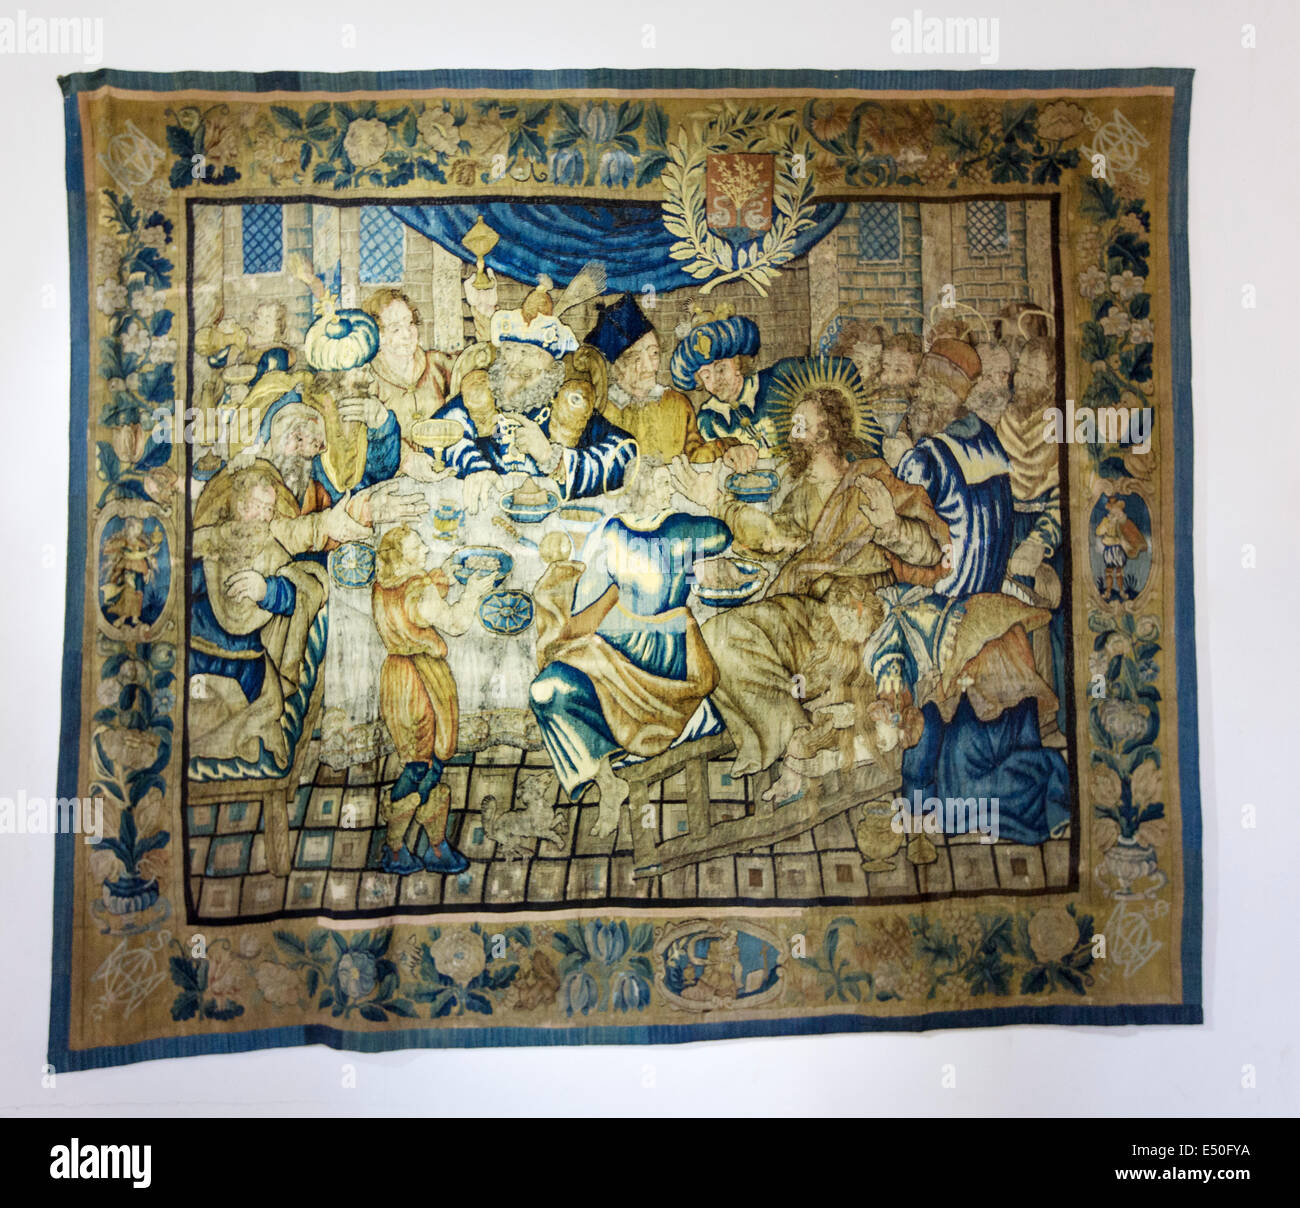 Tapestry The Last Supper of Jesus Christ Conques Concas Saint James Way medieval village France Stock Photo